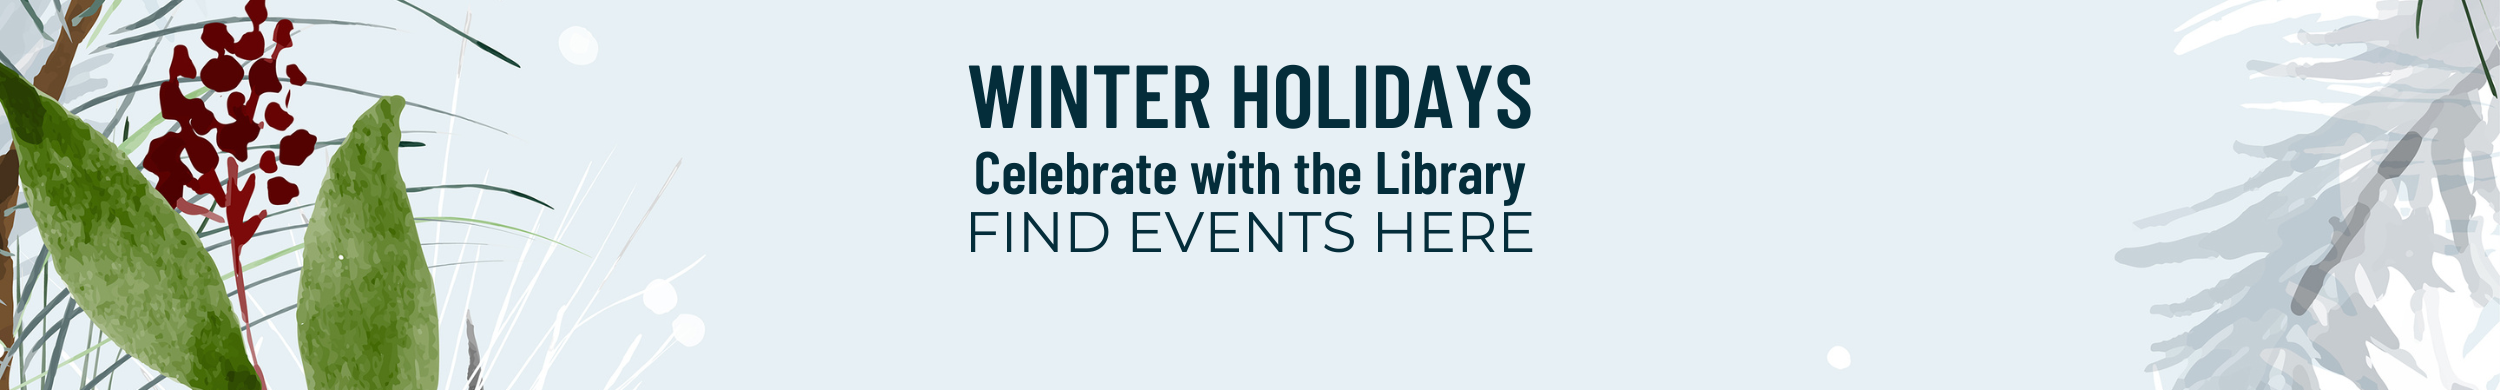 Winter Holidays Events at the Library